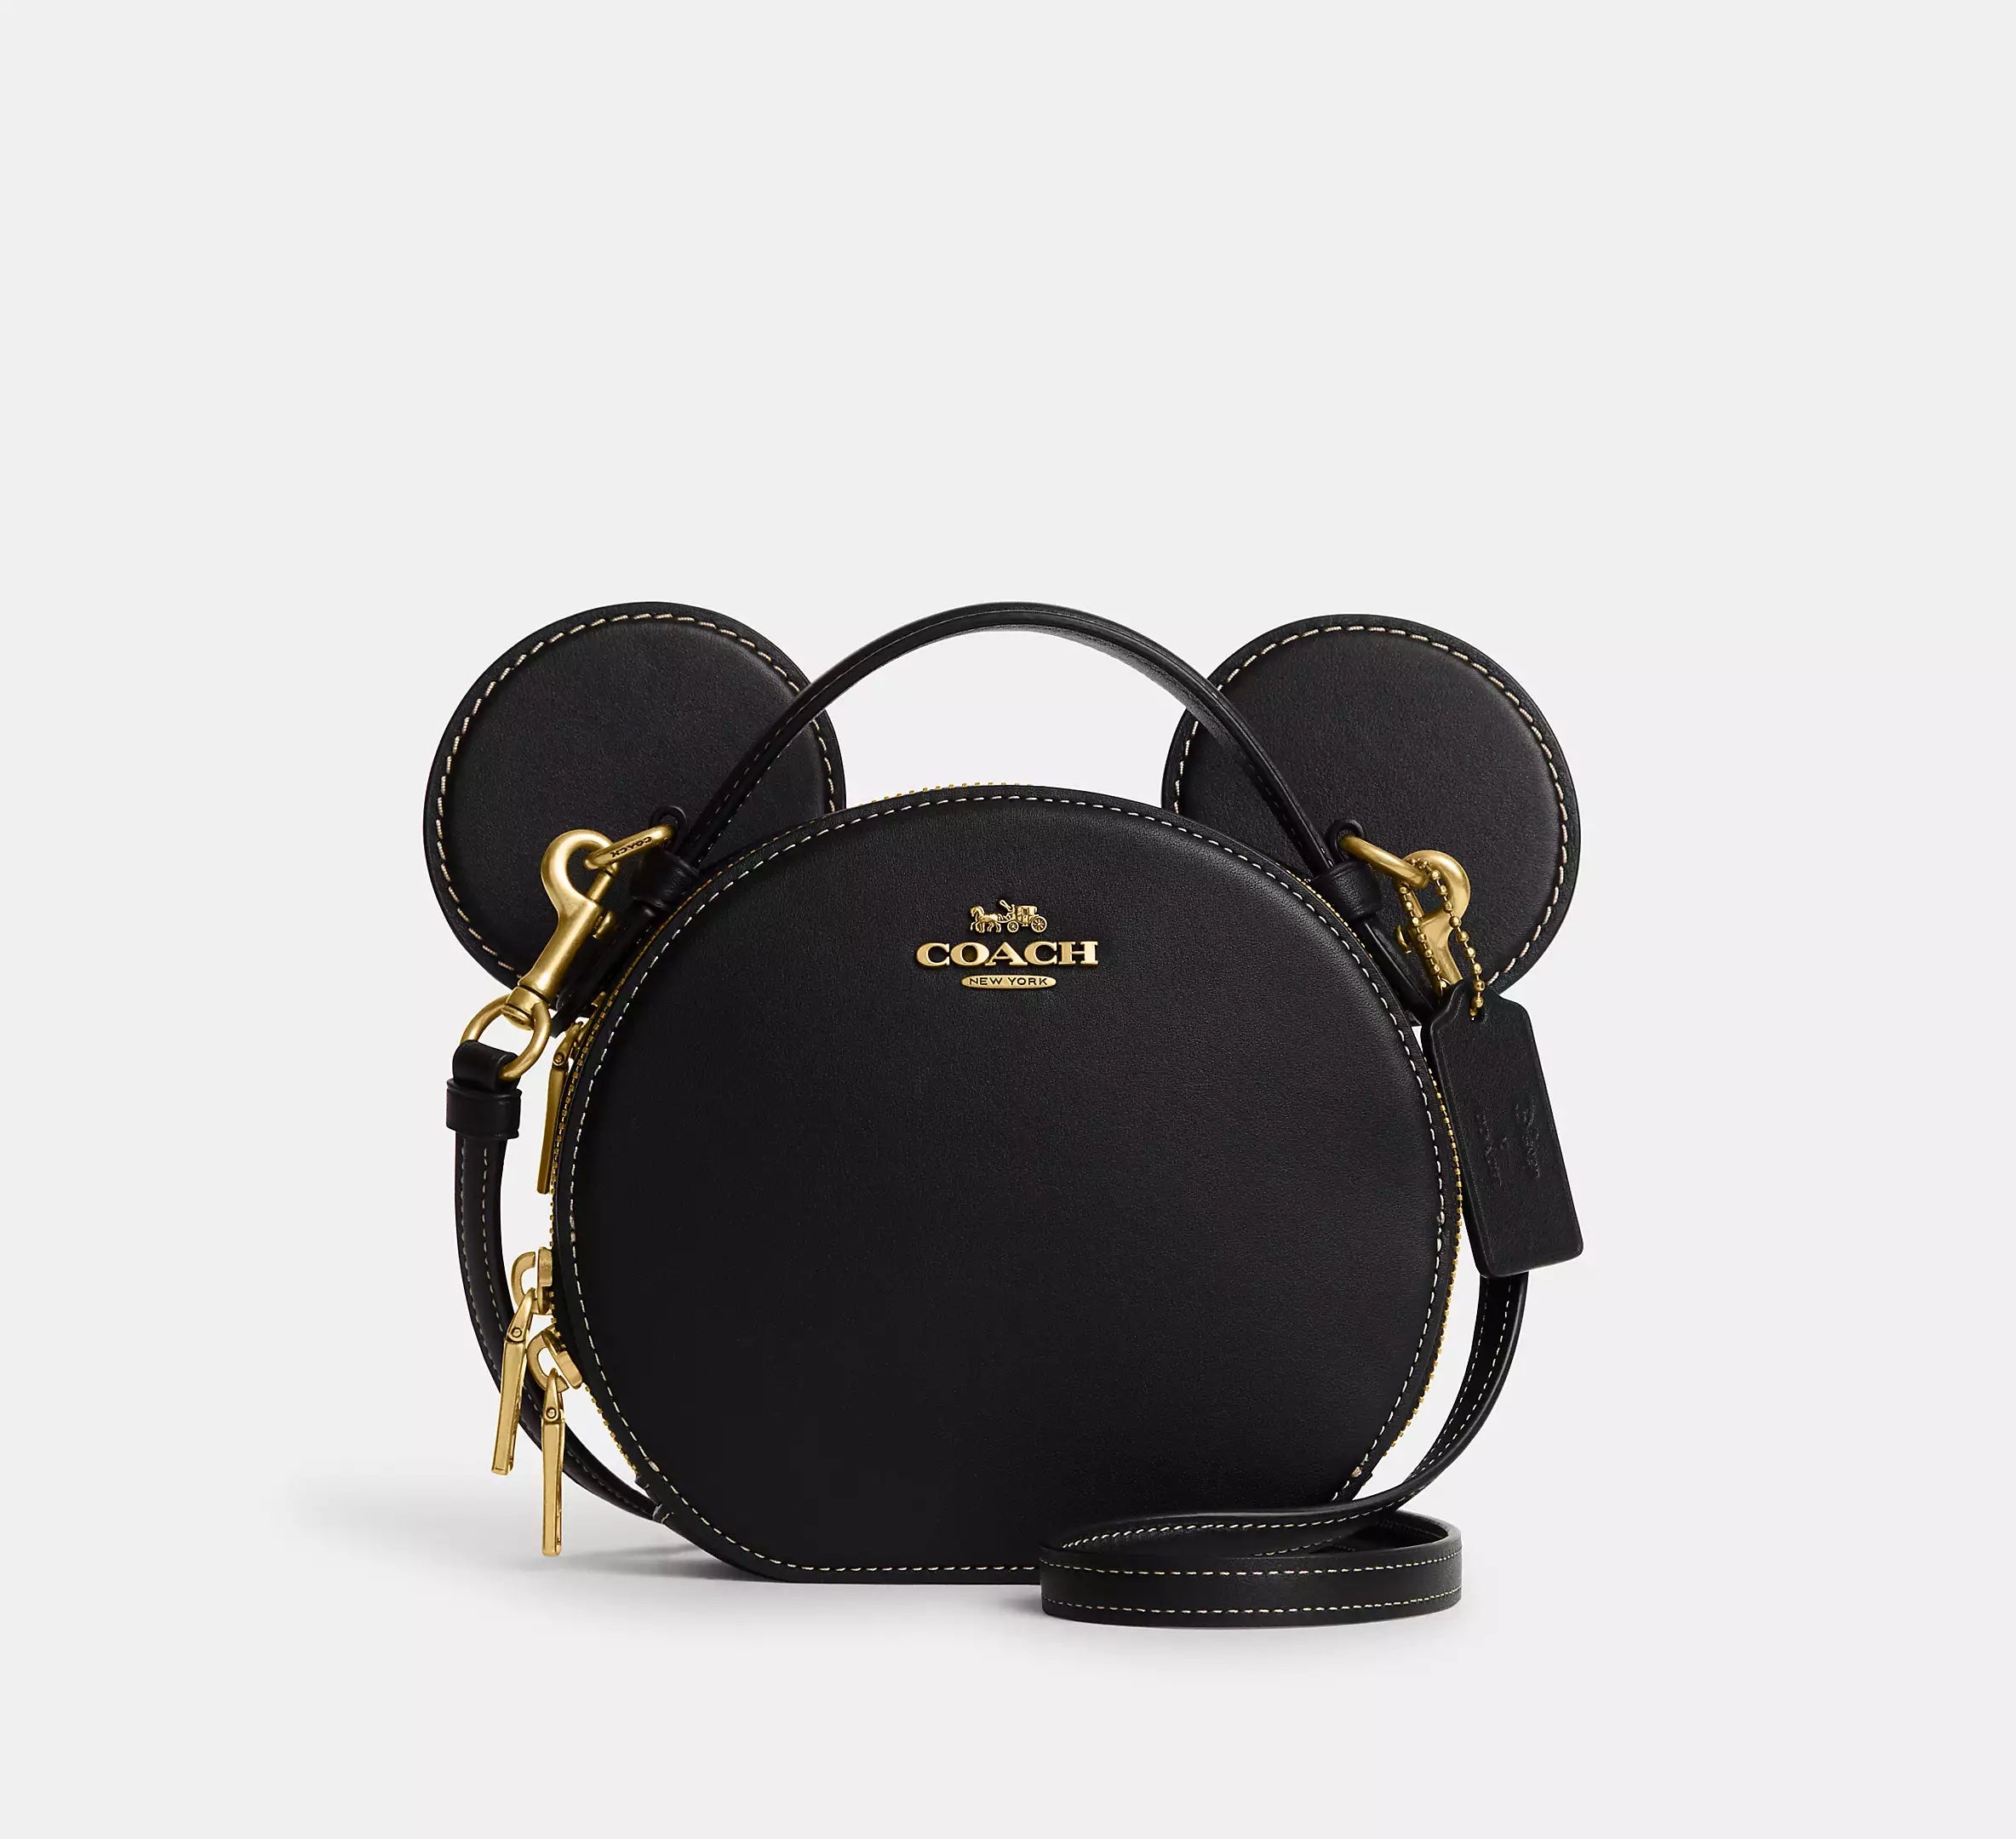 Disney x COACH Bag & Mickey Keychain Teased for May 2022 on shopDisney UK  and US - Disneyland News Today